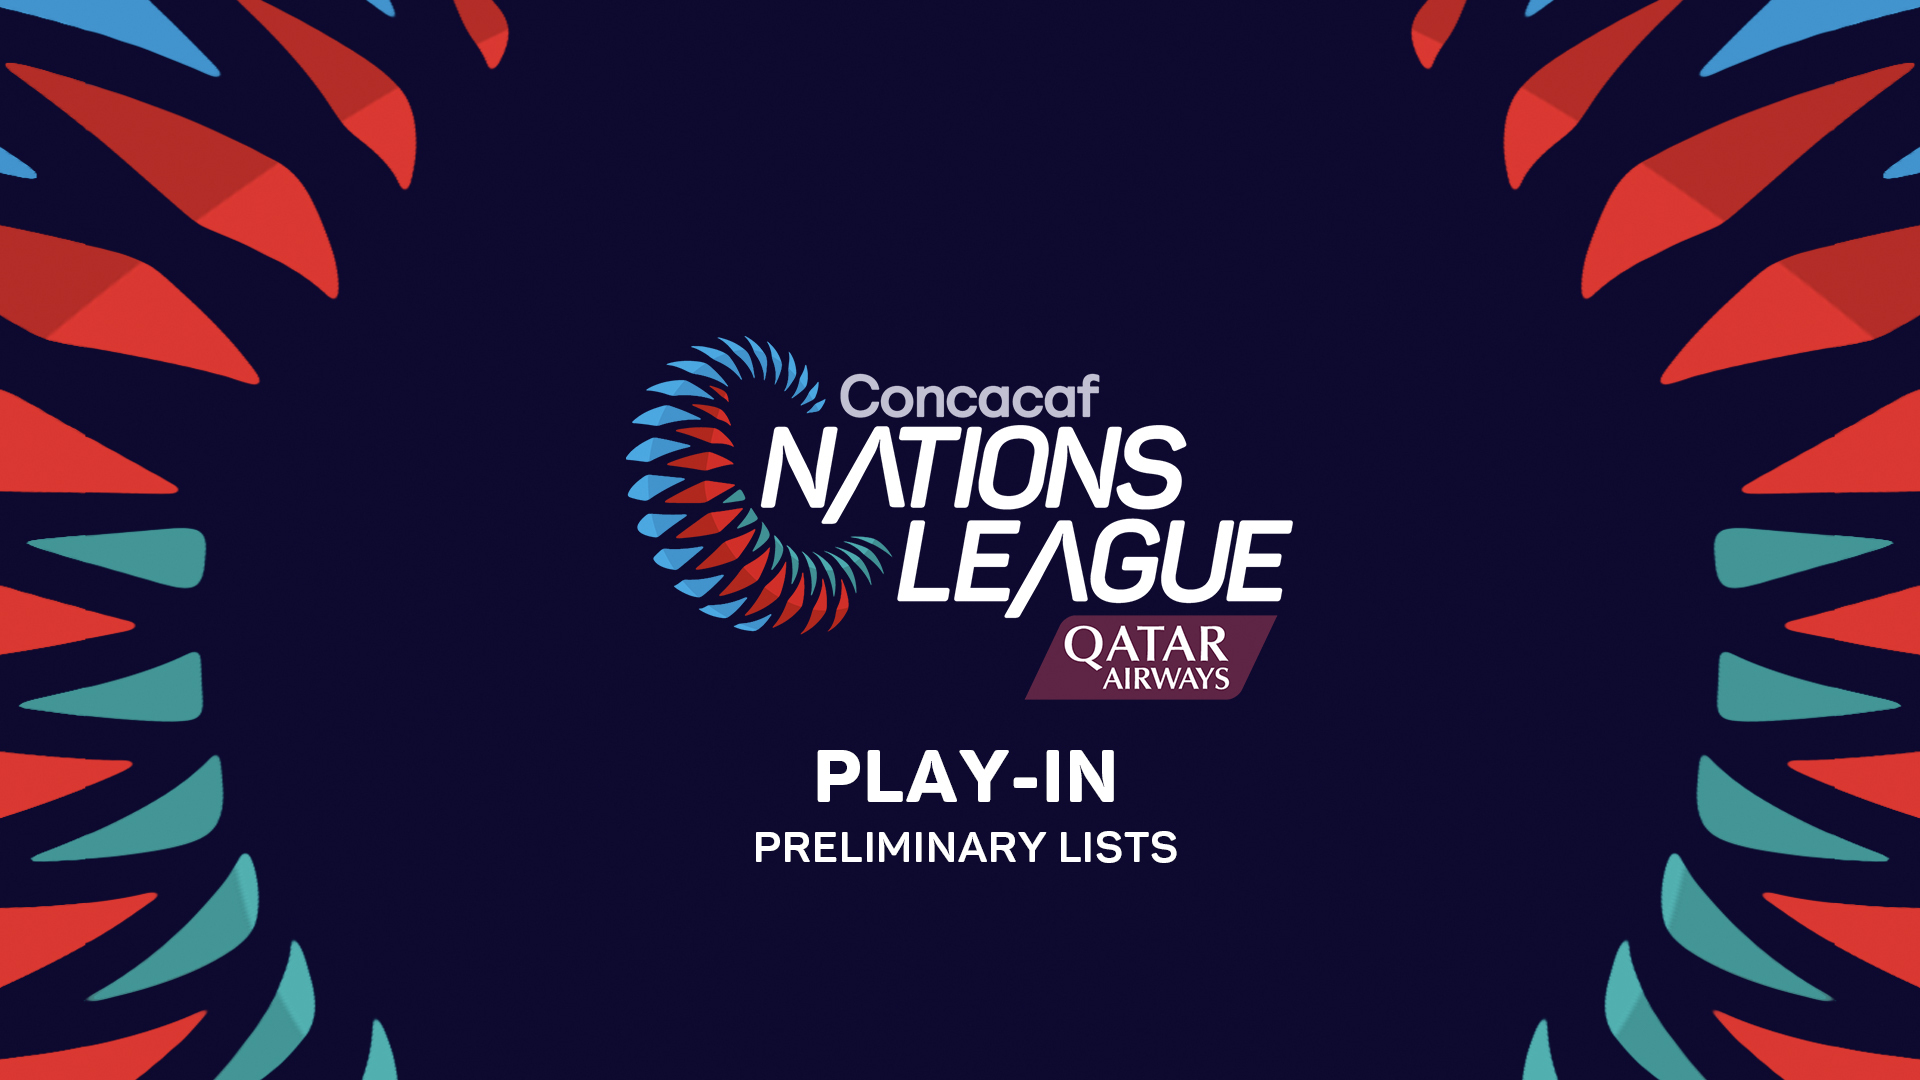 concacaf nations league